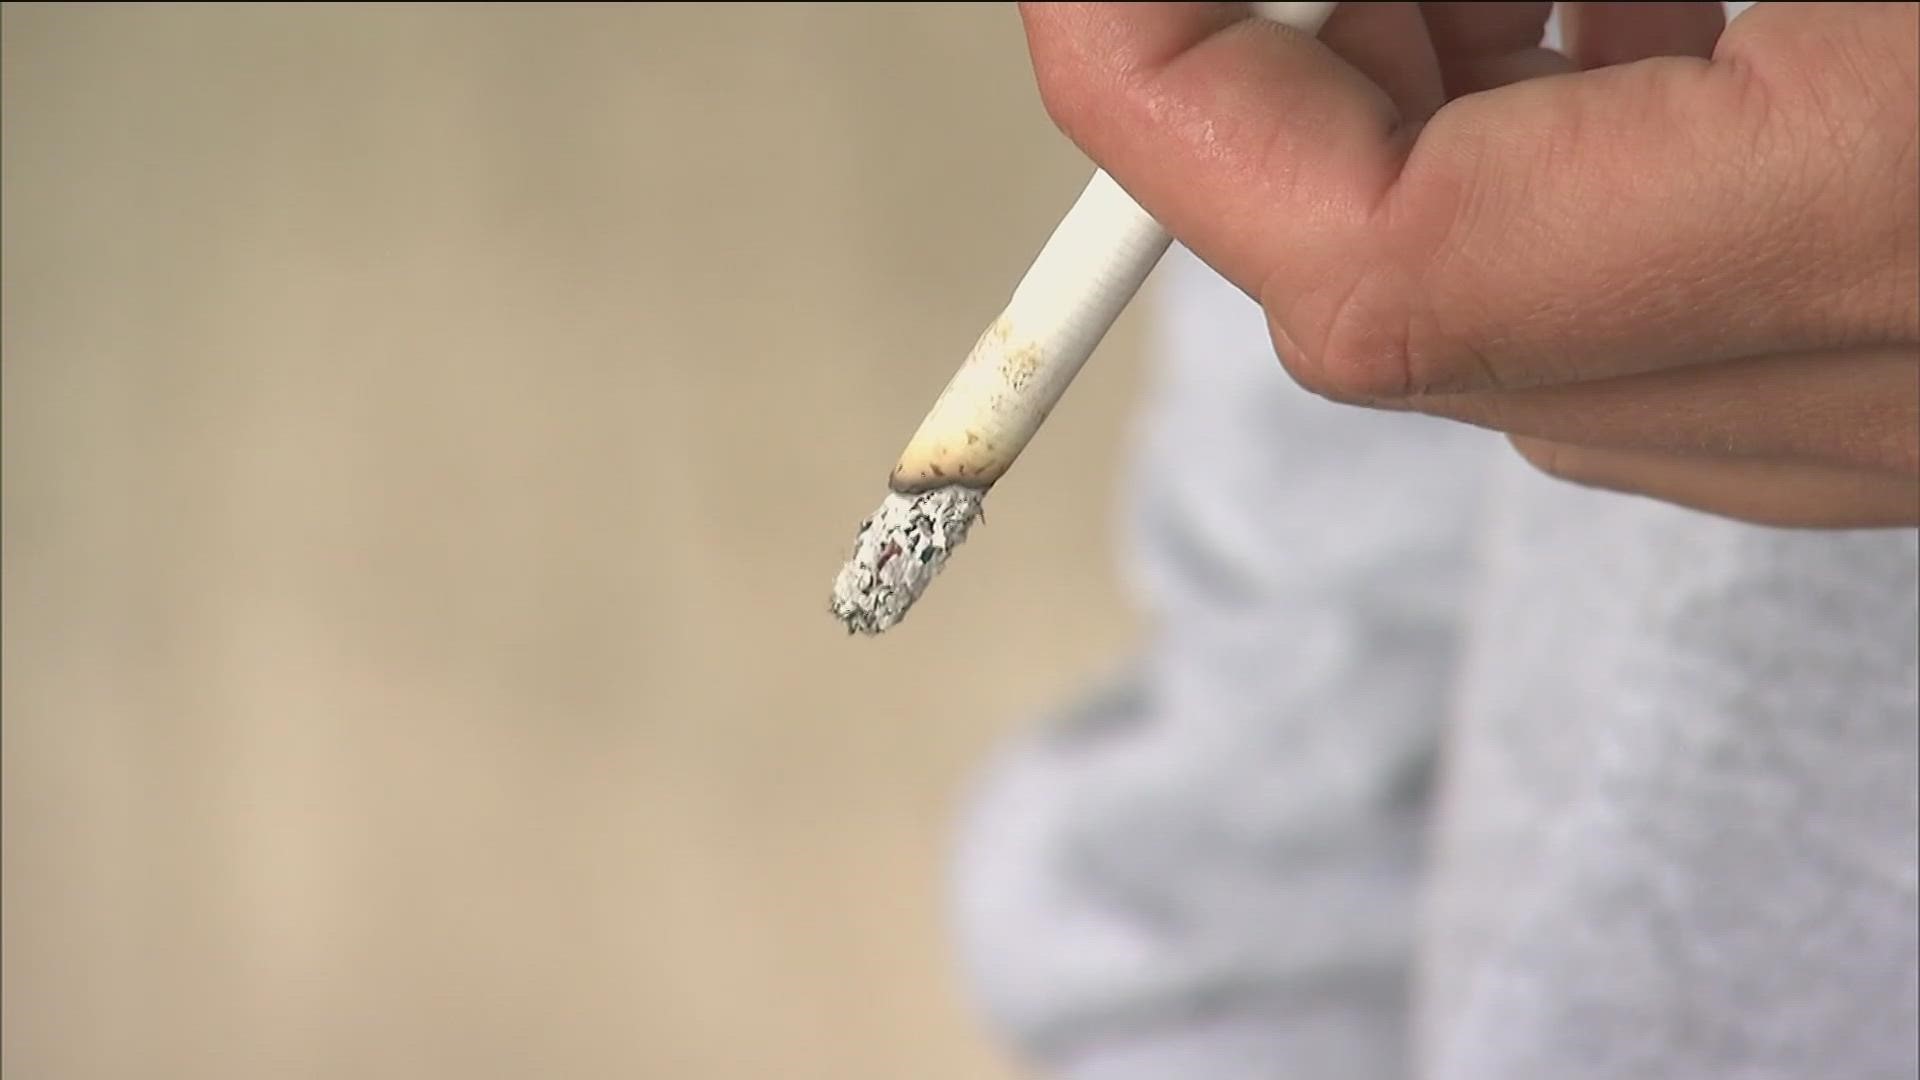 The Peach State lawmakers last raised the state's cigarette 20 years ago.